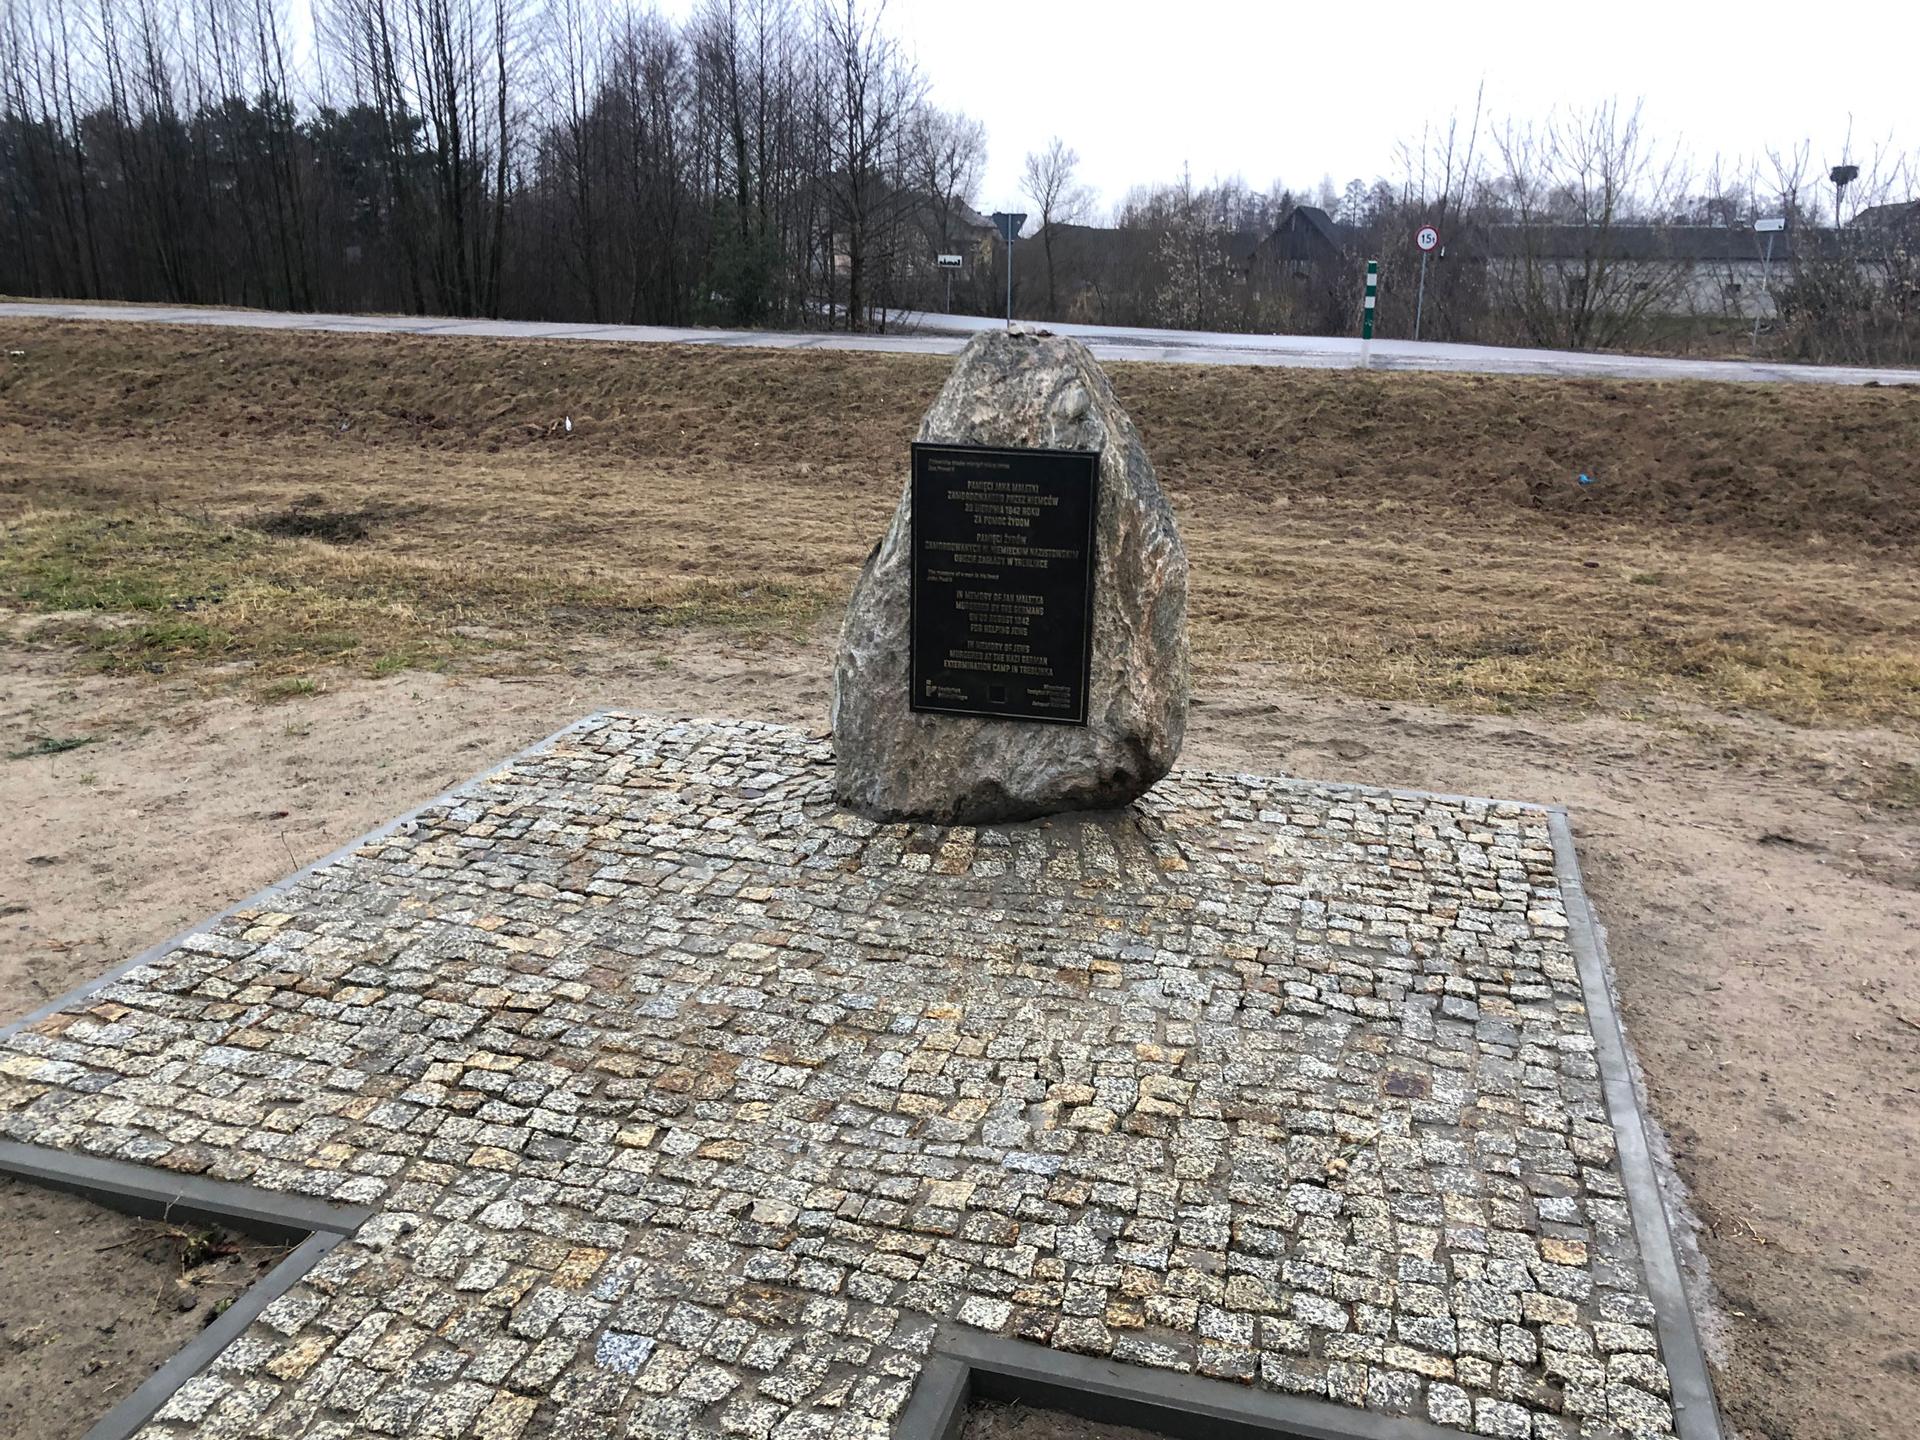 A new monument at the Treblinka railway station has sparked debate among Holocaust historians.